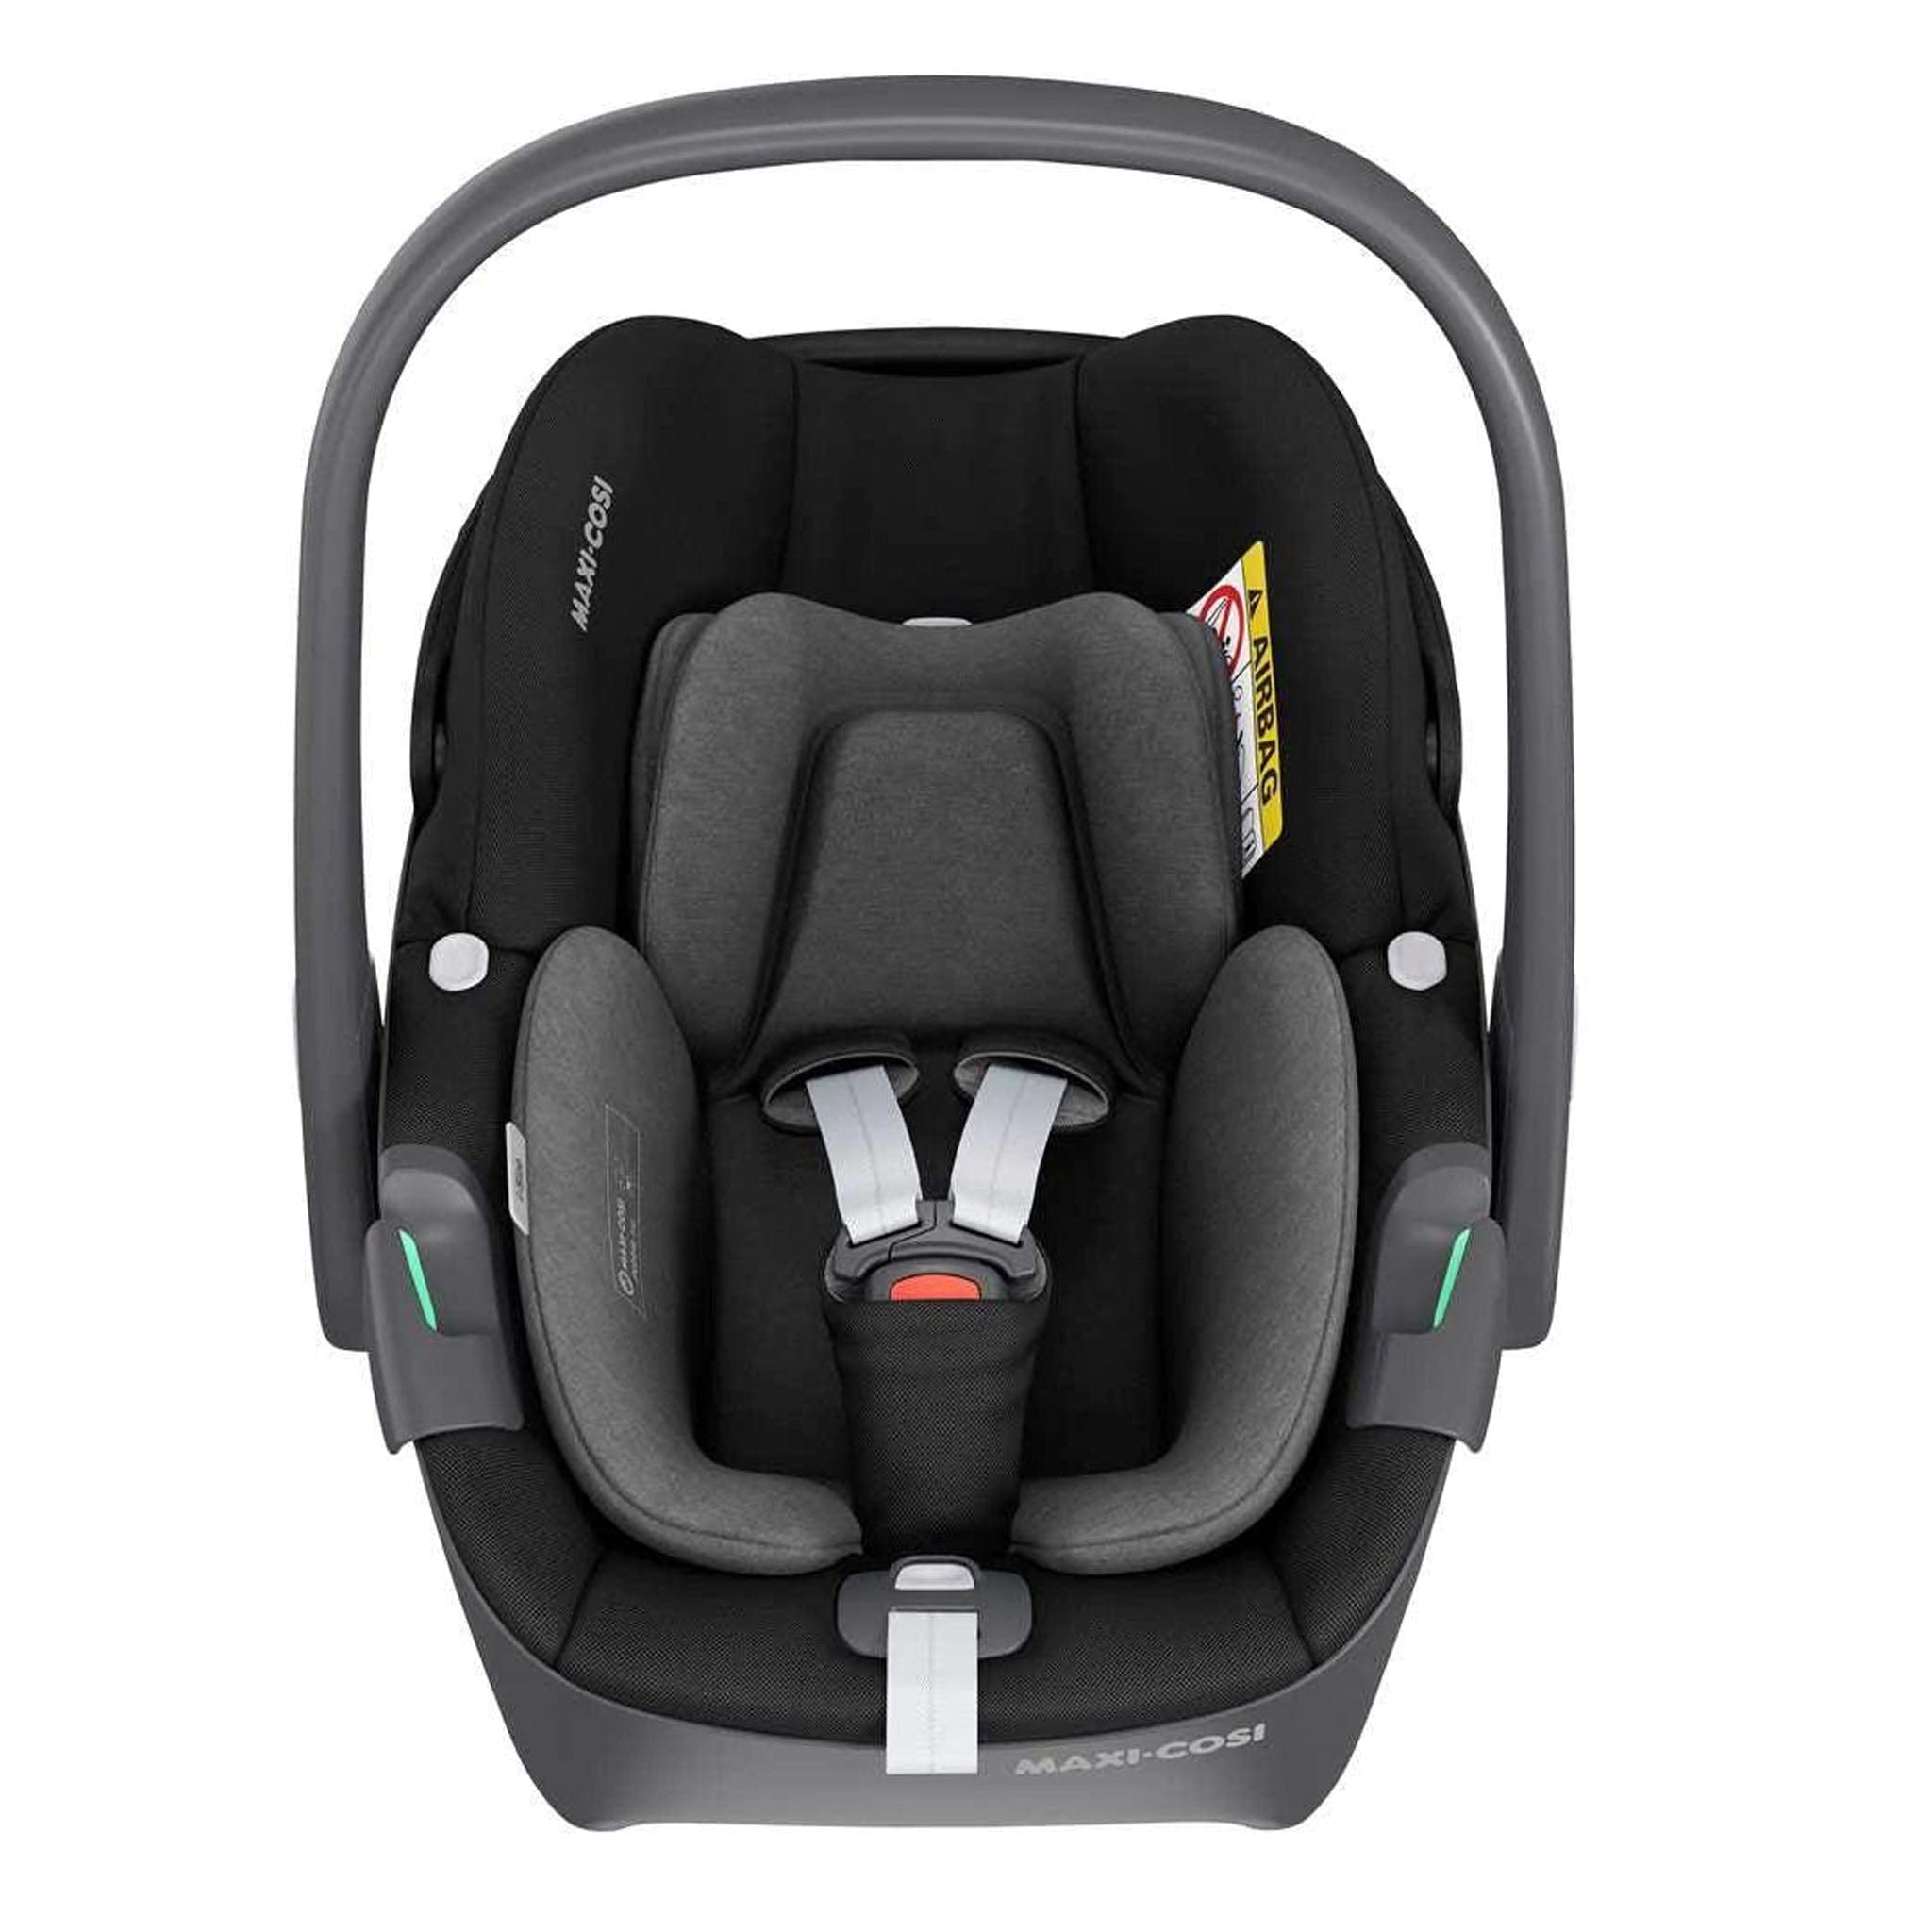 Maxi-Cosi Adorra Luxe Pebble 360 Travel System in Twillic Black Travel Systems KF44200000 3220660339402